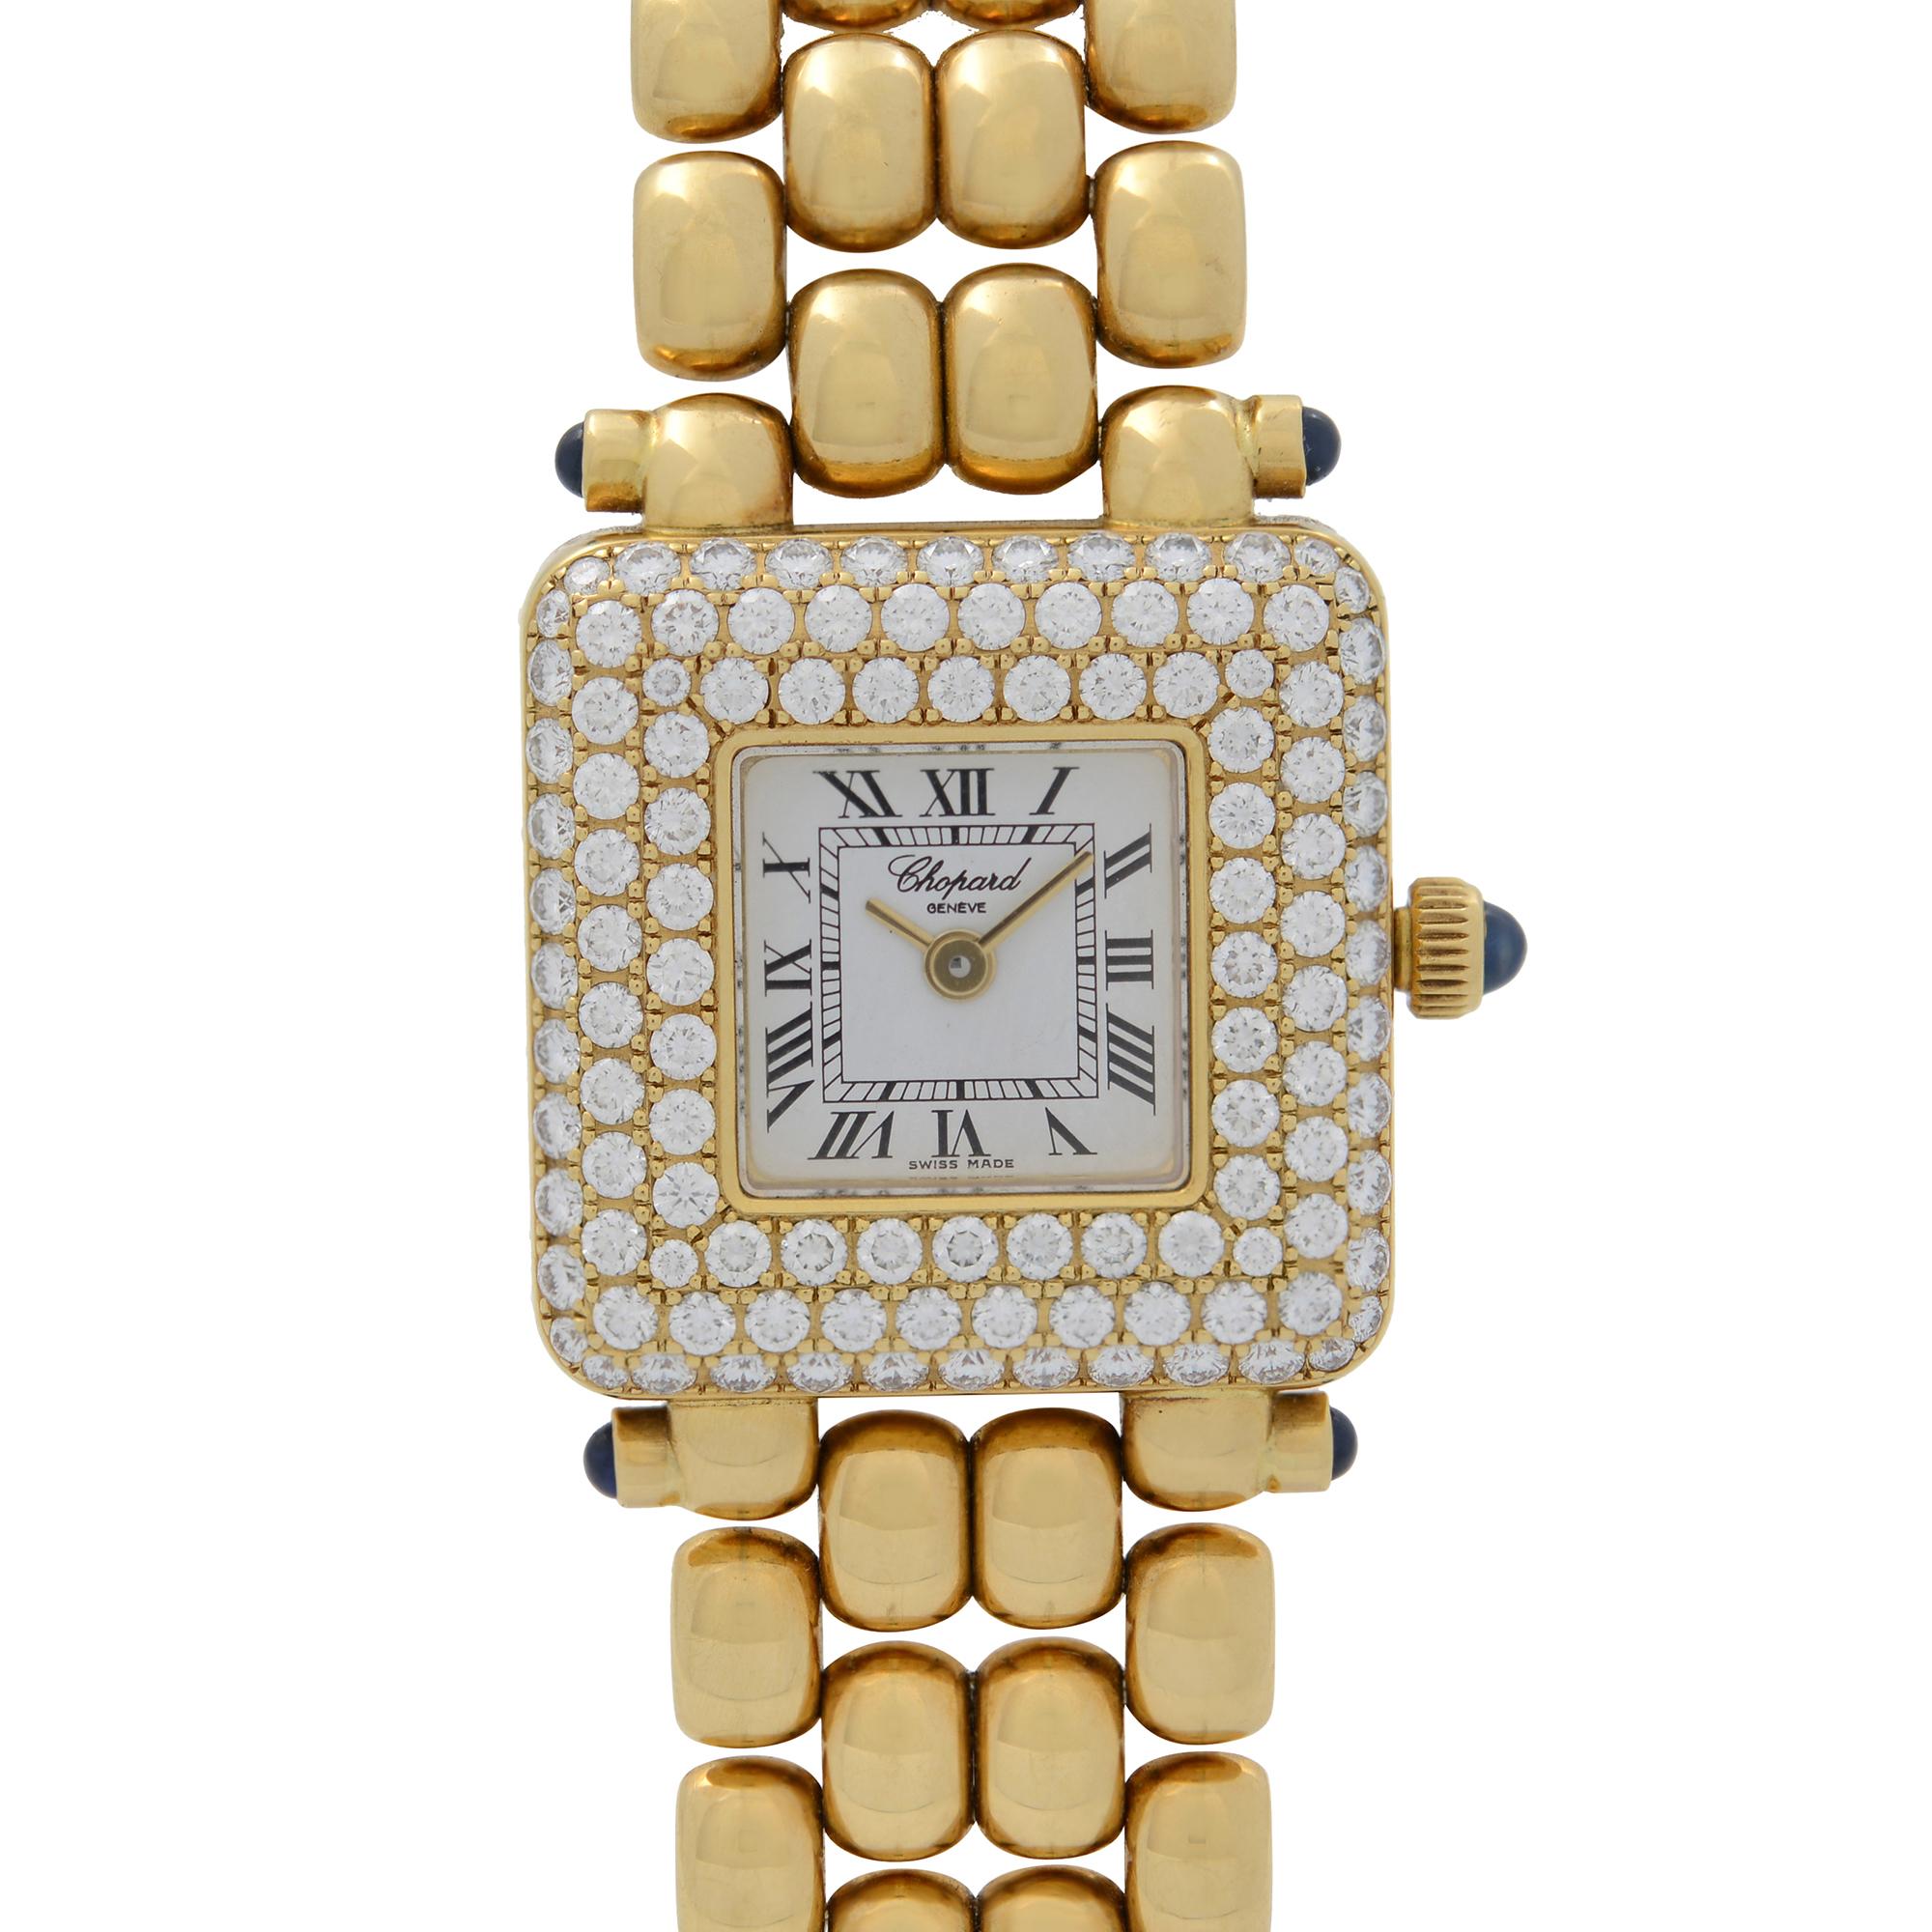 Pre-Owned Chopard Happy Sport 18K Yellow Gold Diamond White Dial Ladies Watch 10/6115-23. This Beautiful Timepiece is Powered by Quartz (Battery) Movement And Features: 18k Yellow Gold Case and Bracelet, Fixed 18k Gold Bezel Set with Diamonds, White